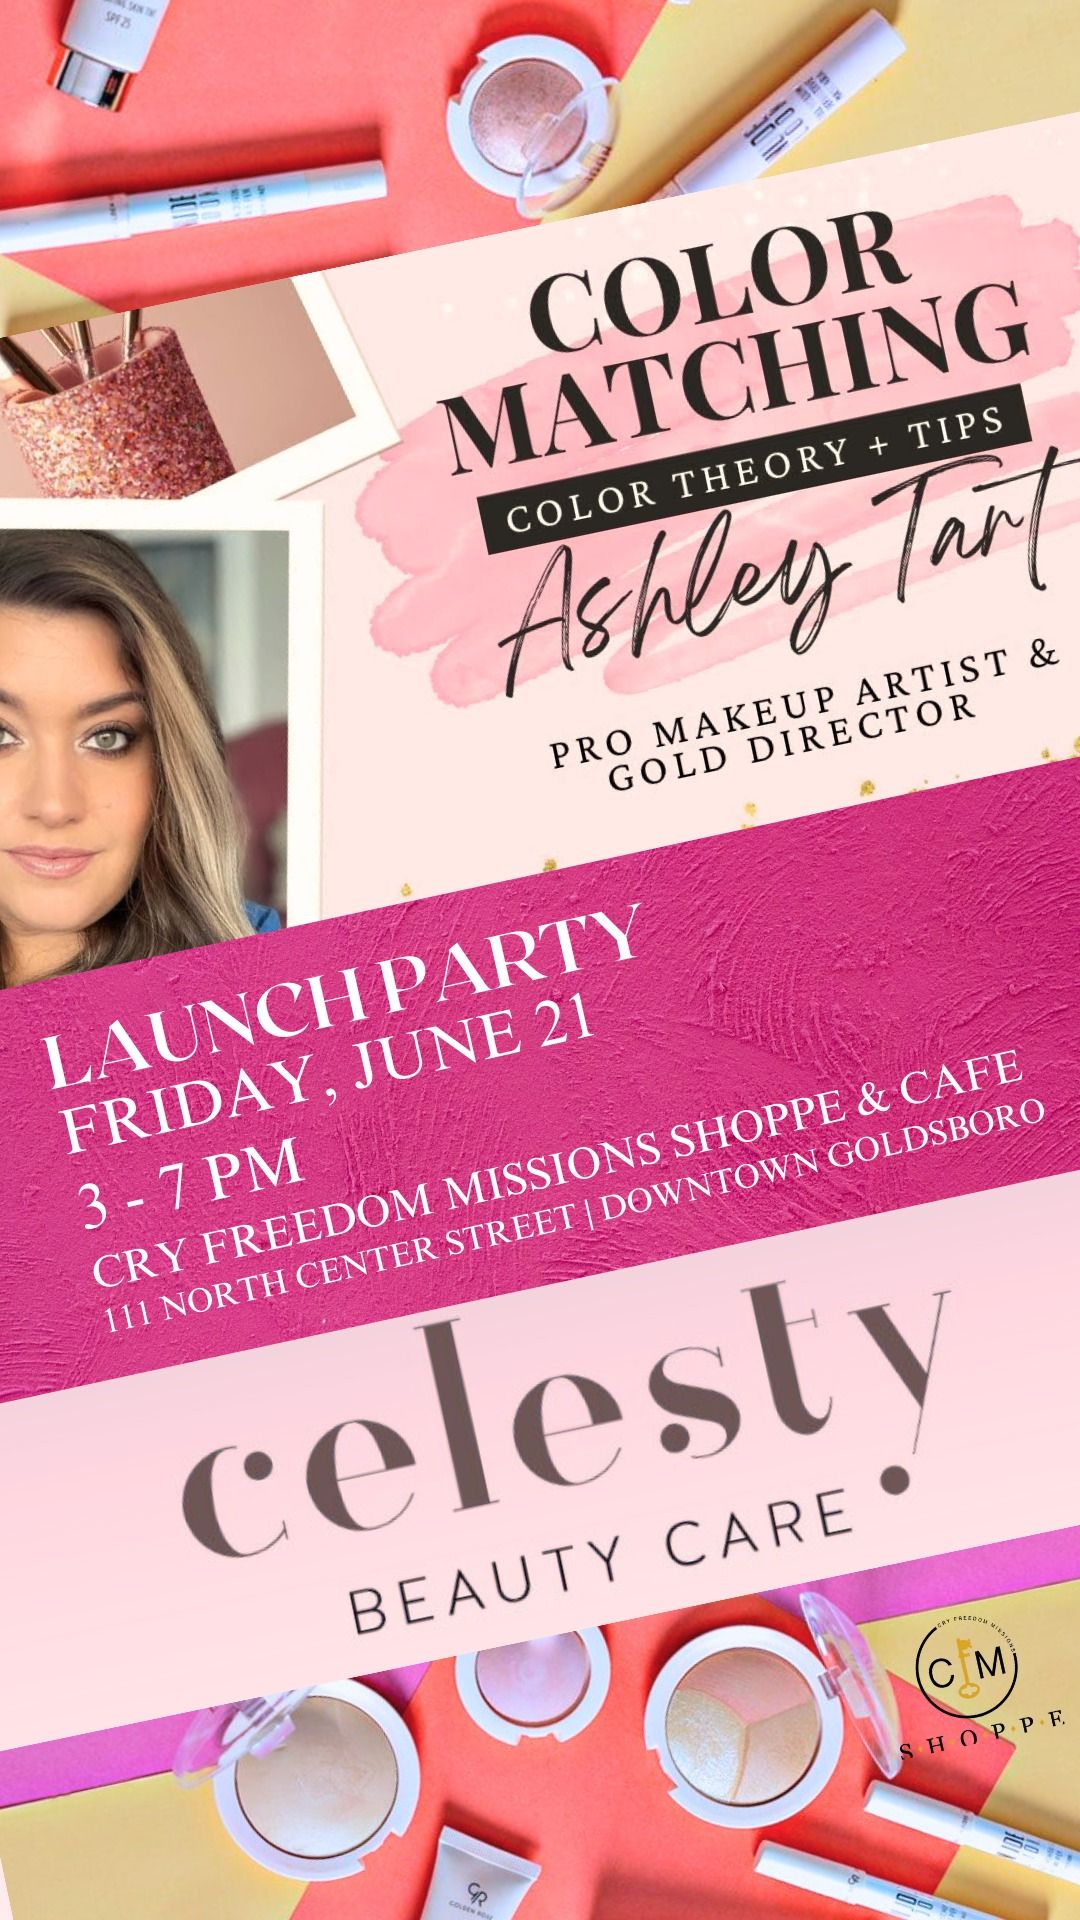 Launch Party for Celesty Beauty Care